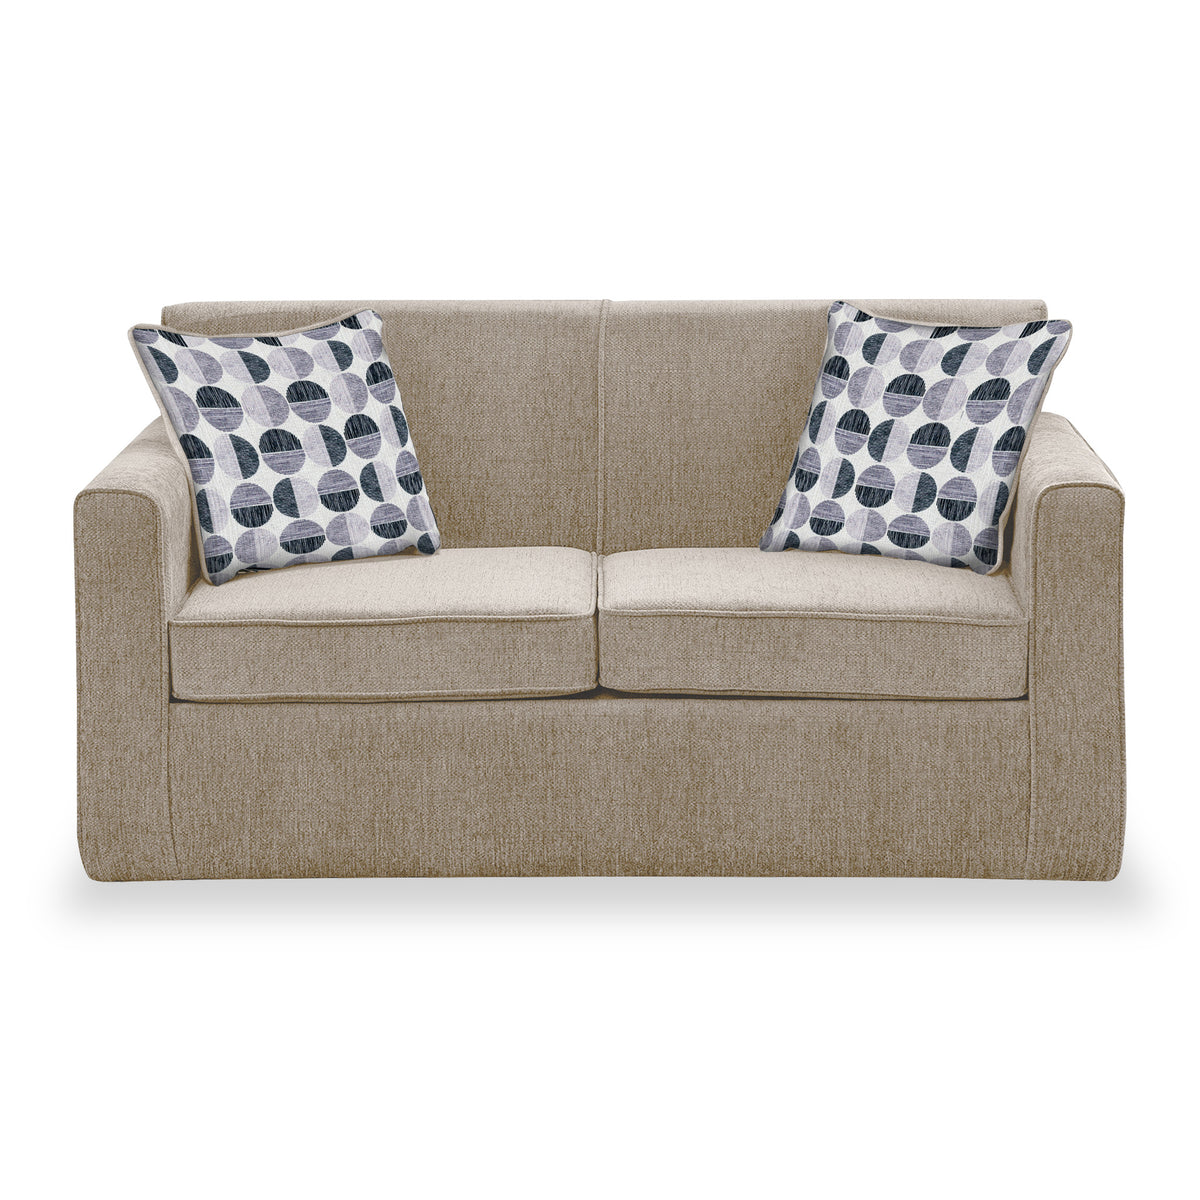 Welton Fawn Soft Weave 2 Seater Sofa Bed with Refus Mono Cushions